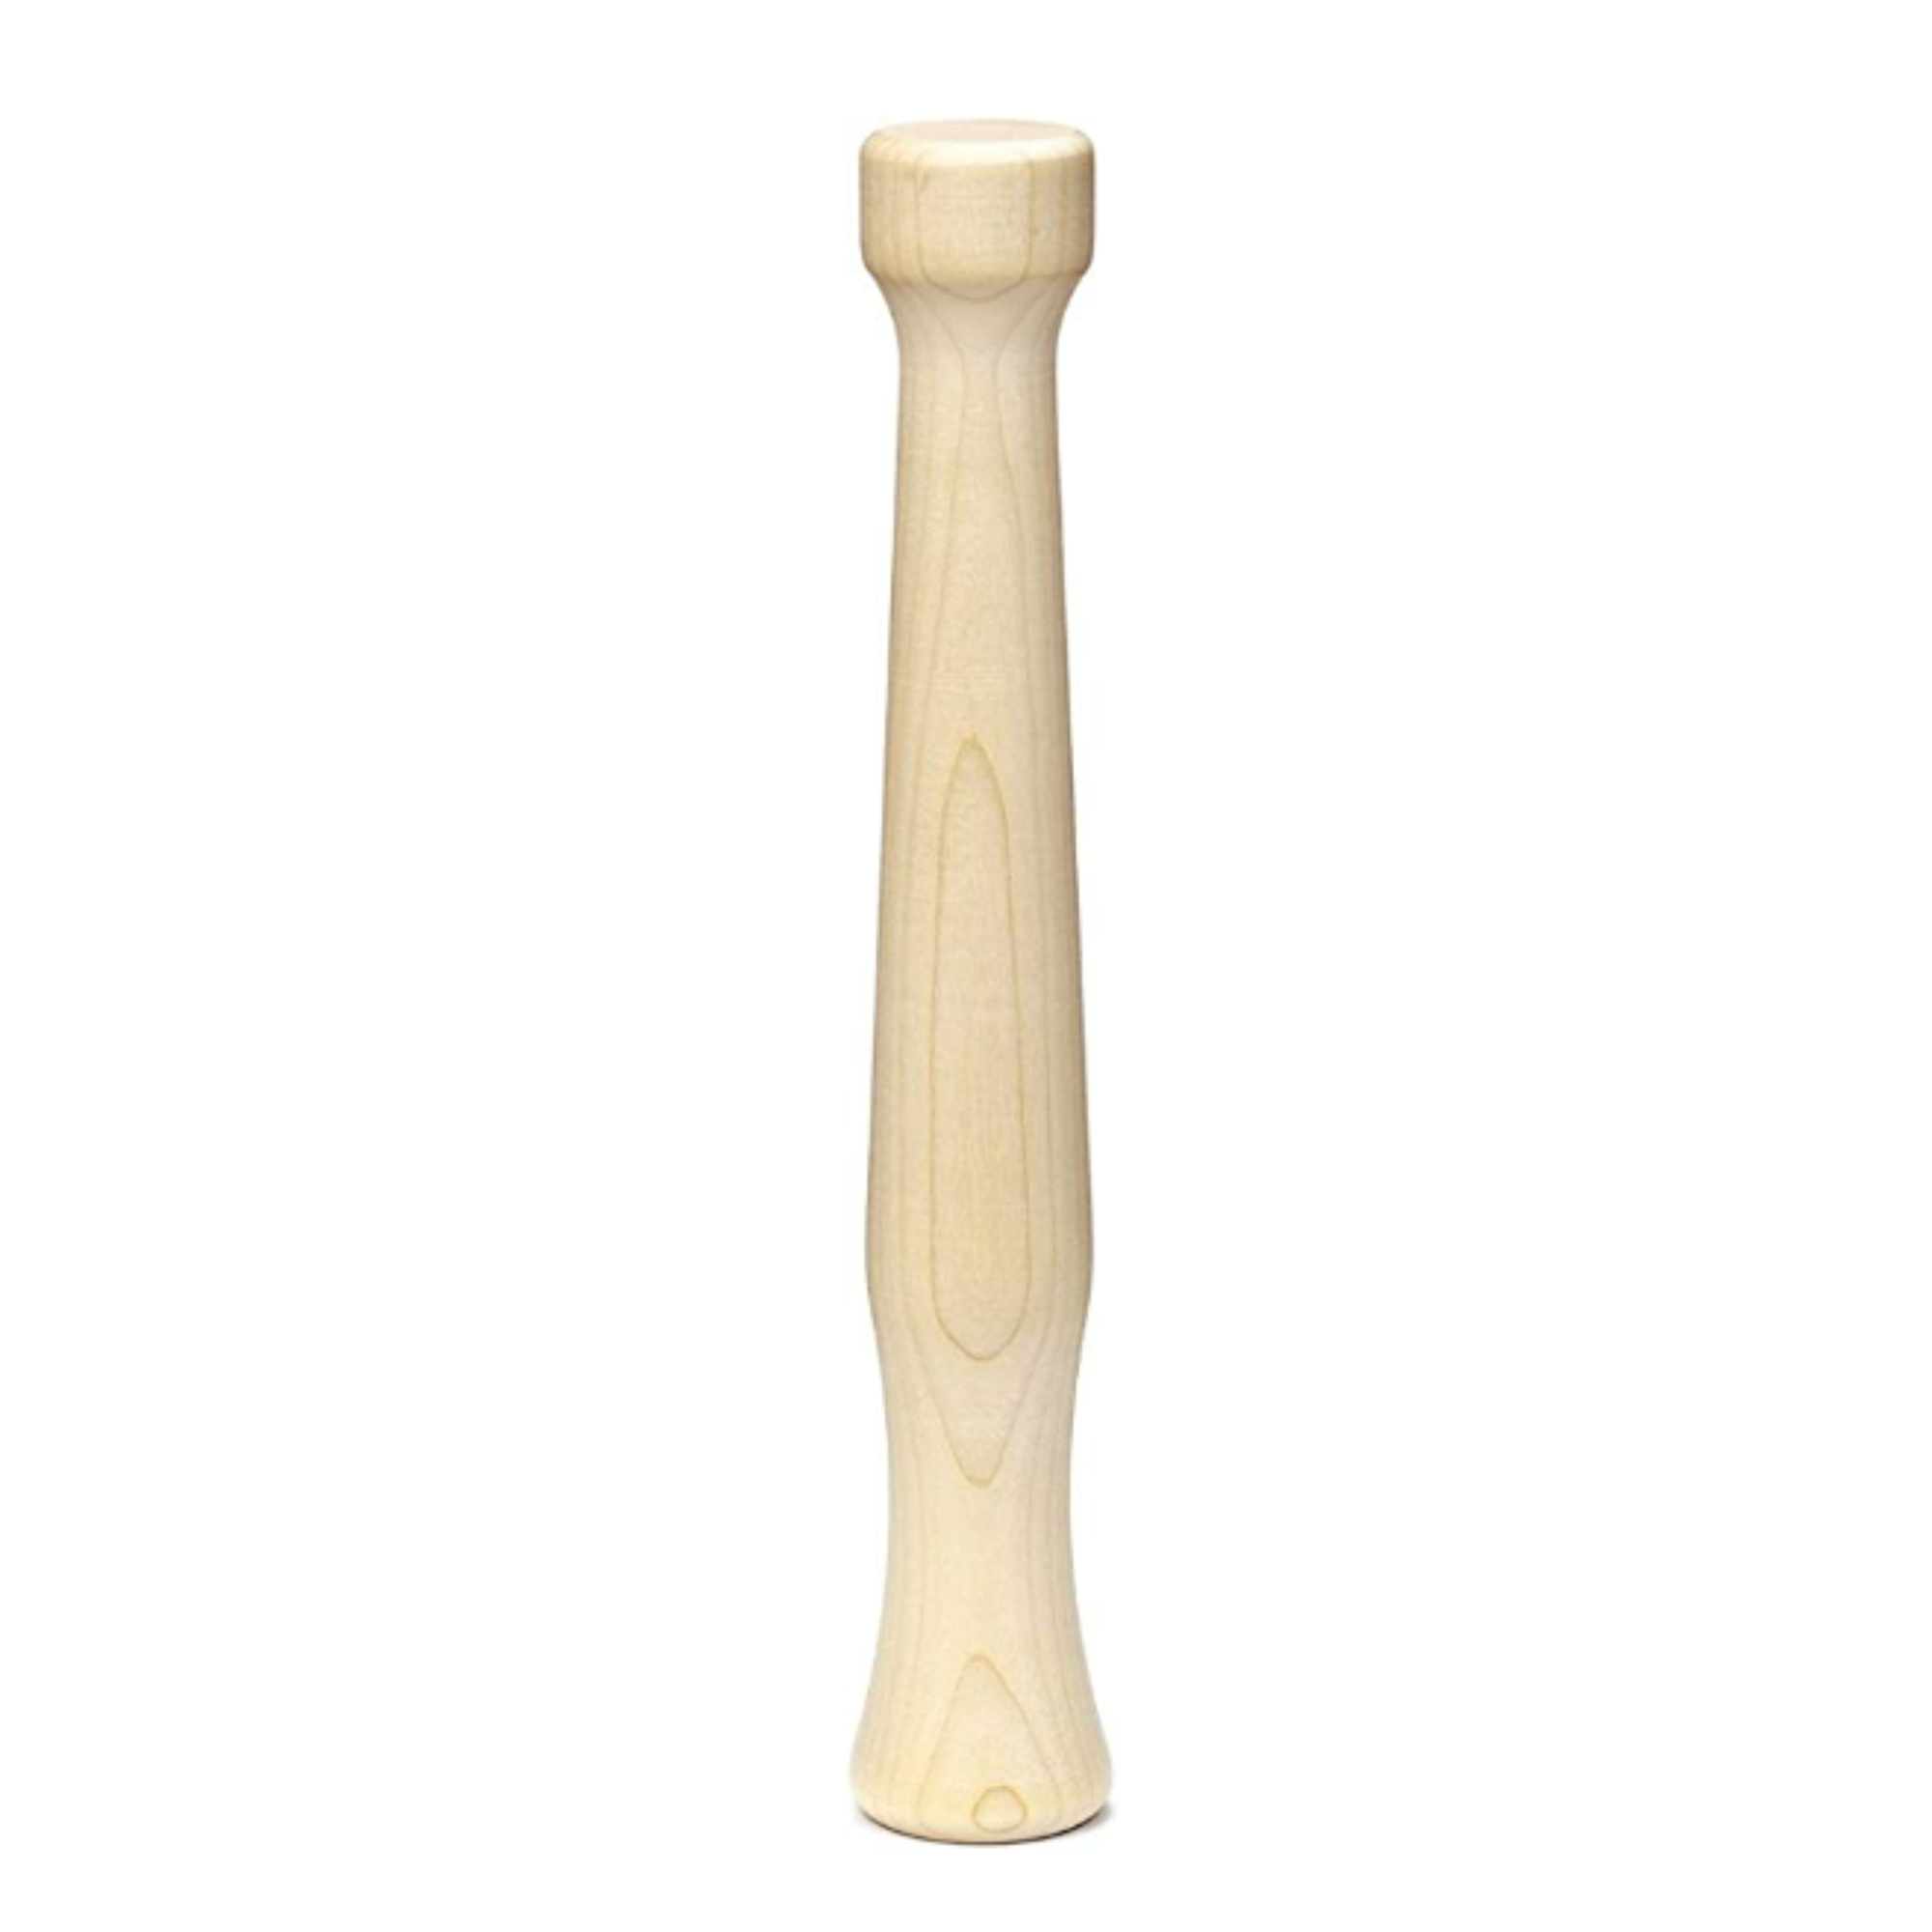 Fletcher's Mill Muddler from Amazon, a tall light color wood muddler.